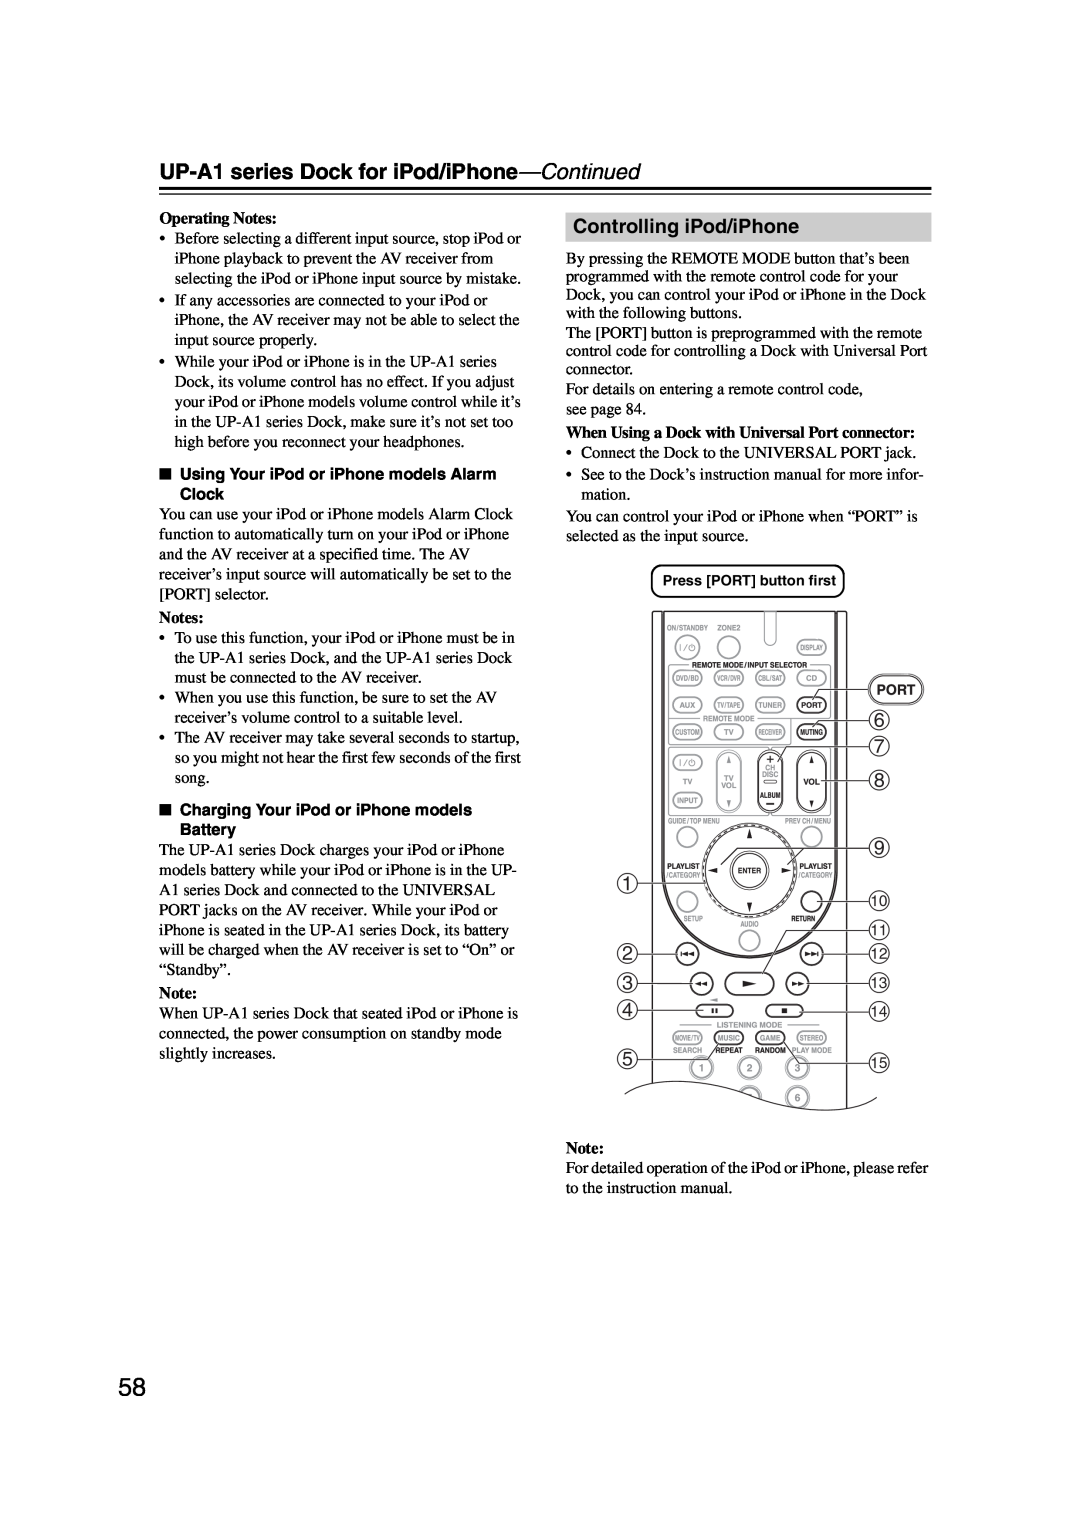 Onkyo 29344937, HT-S6200 instruction manual UP-A1series Dock for iPod/iPhone—Continued 